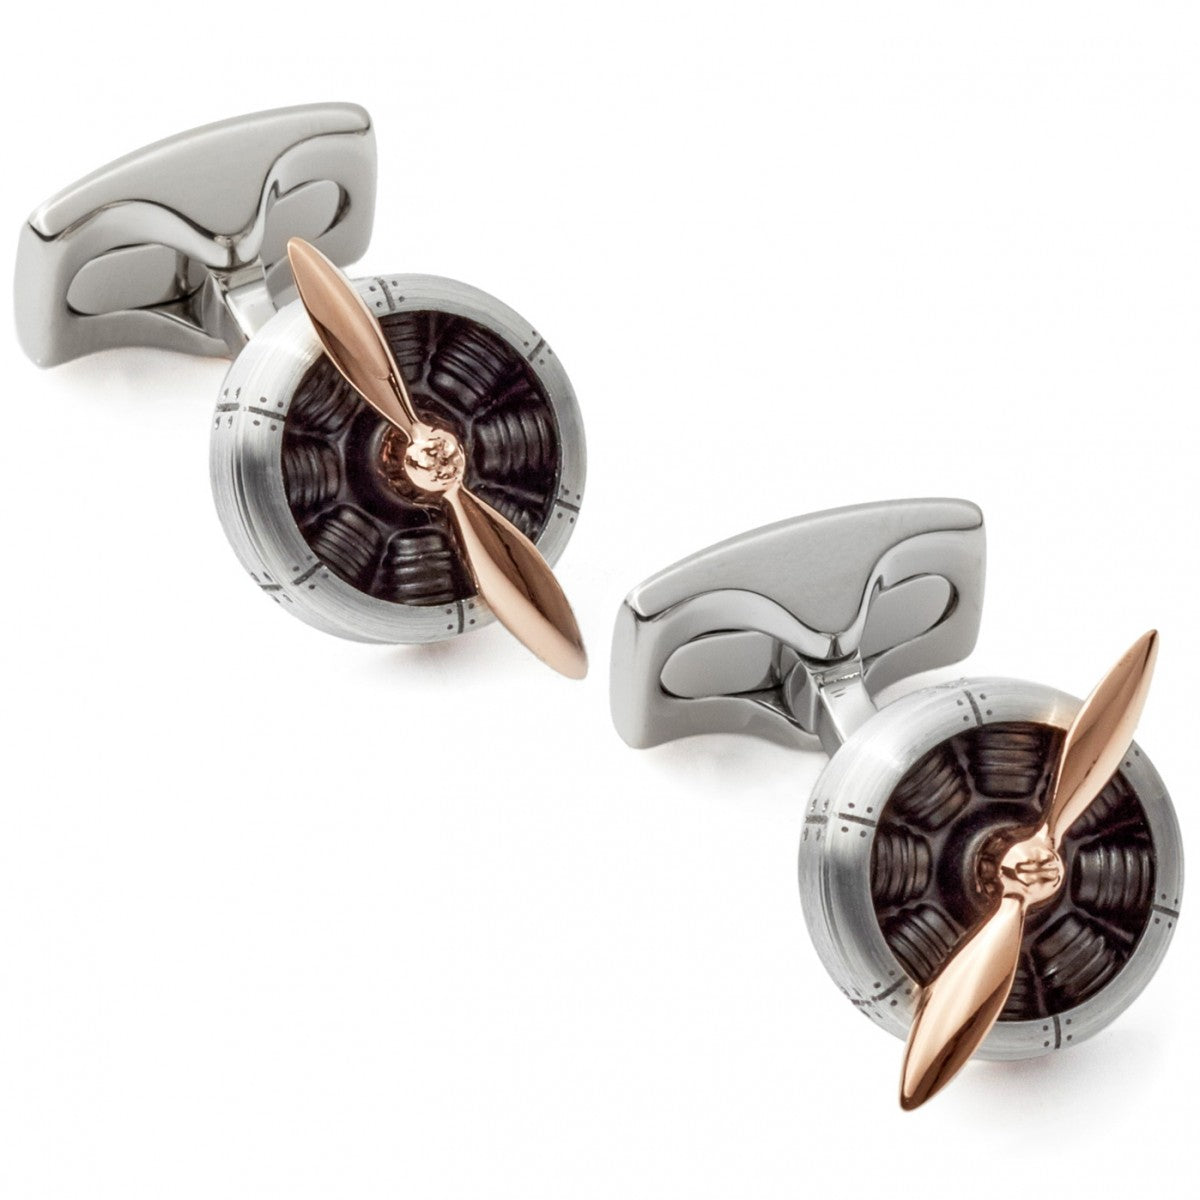 Deakin and Francis Fundamentals Mechanicals Sop with Engine in Rose Gold Cufflinks